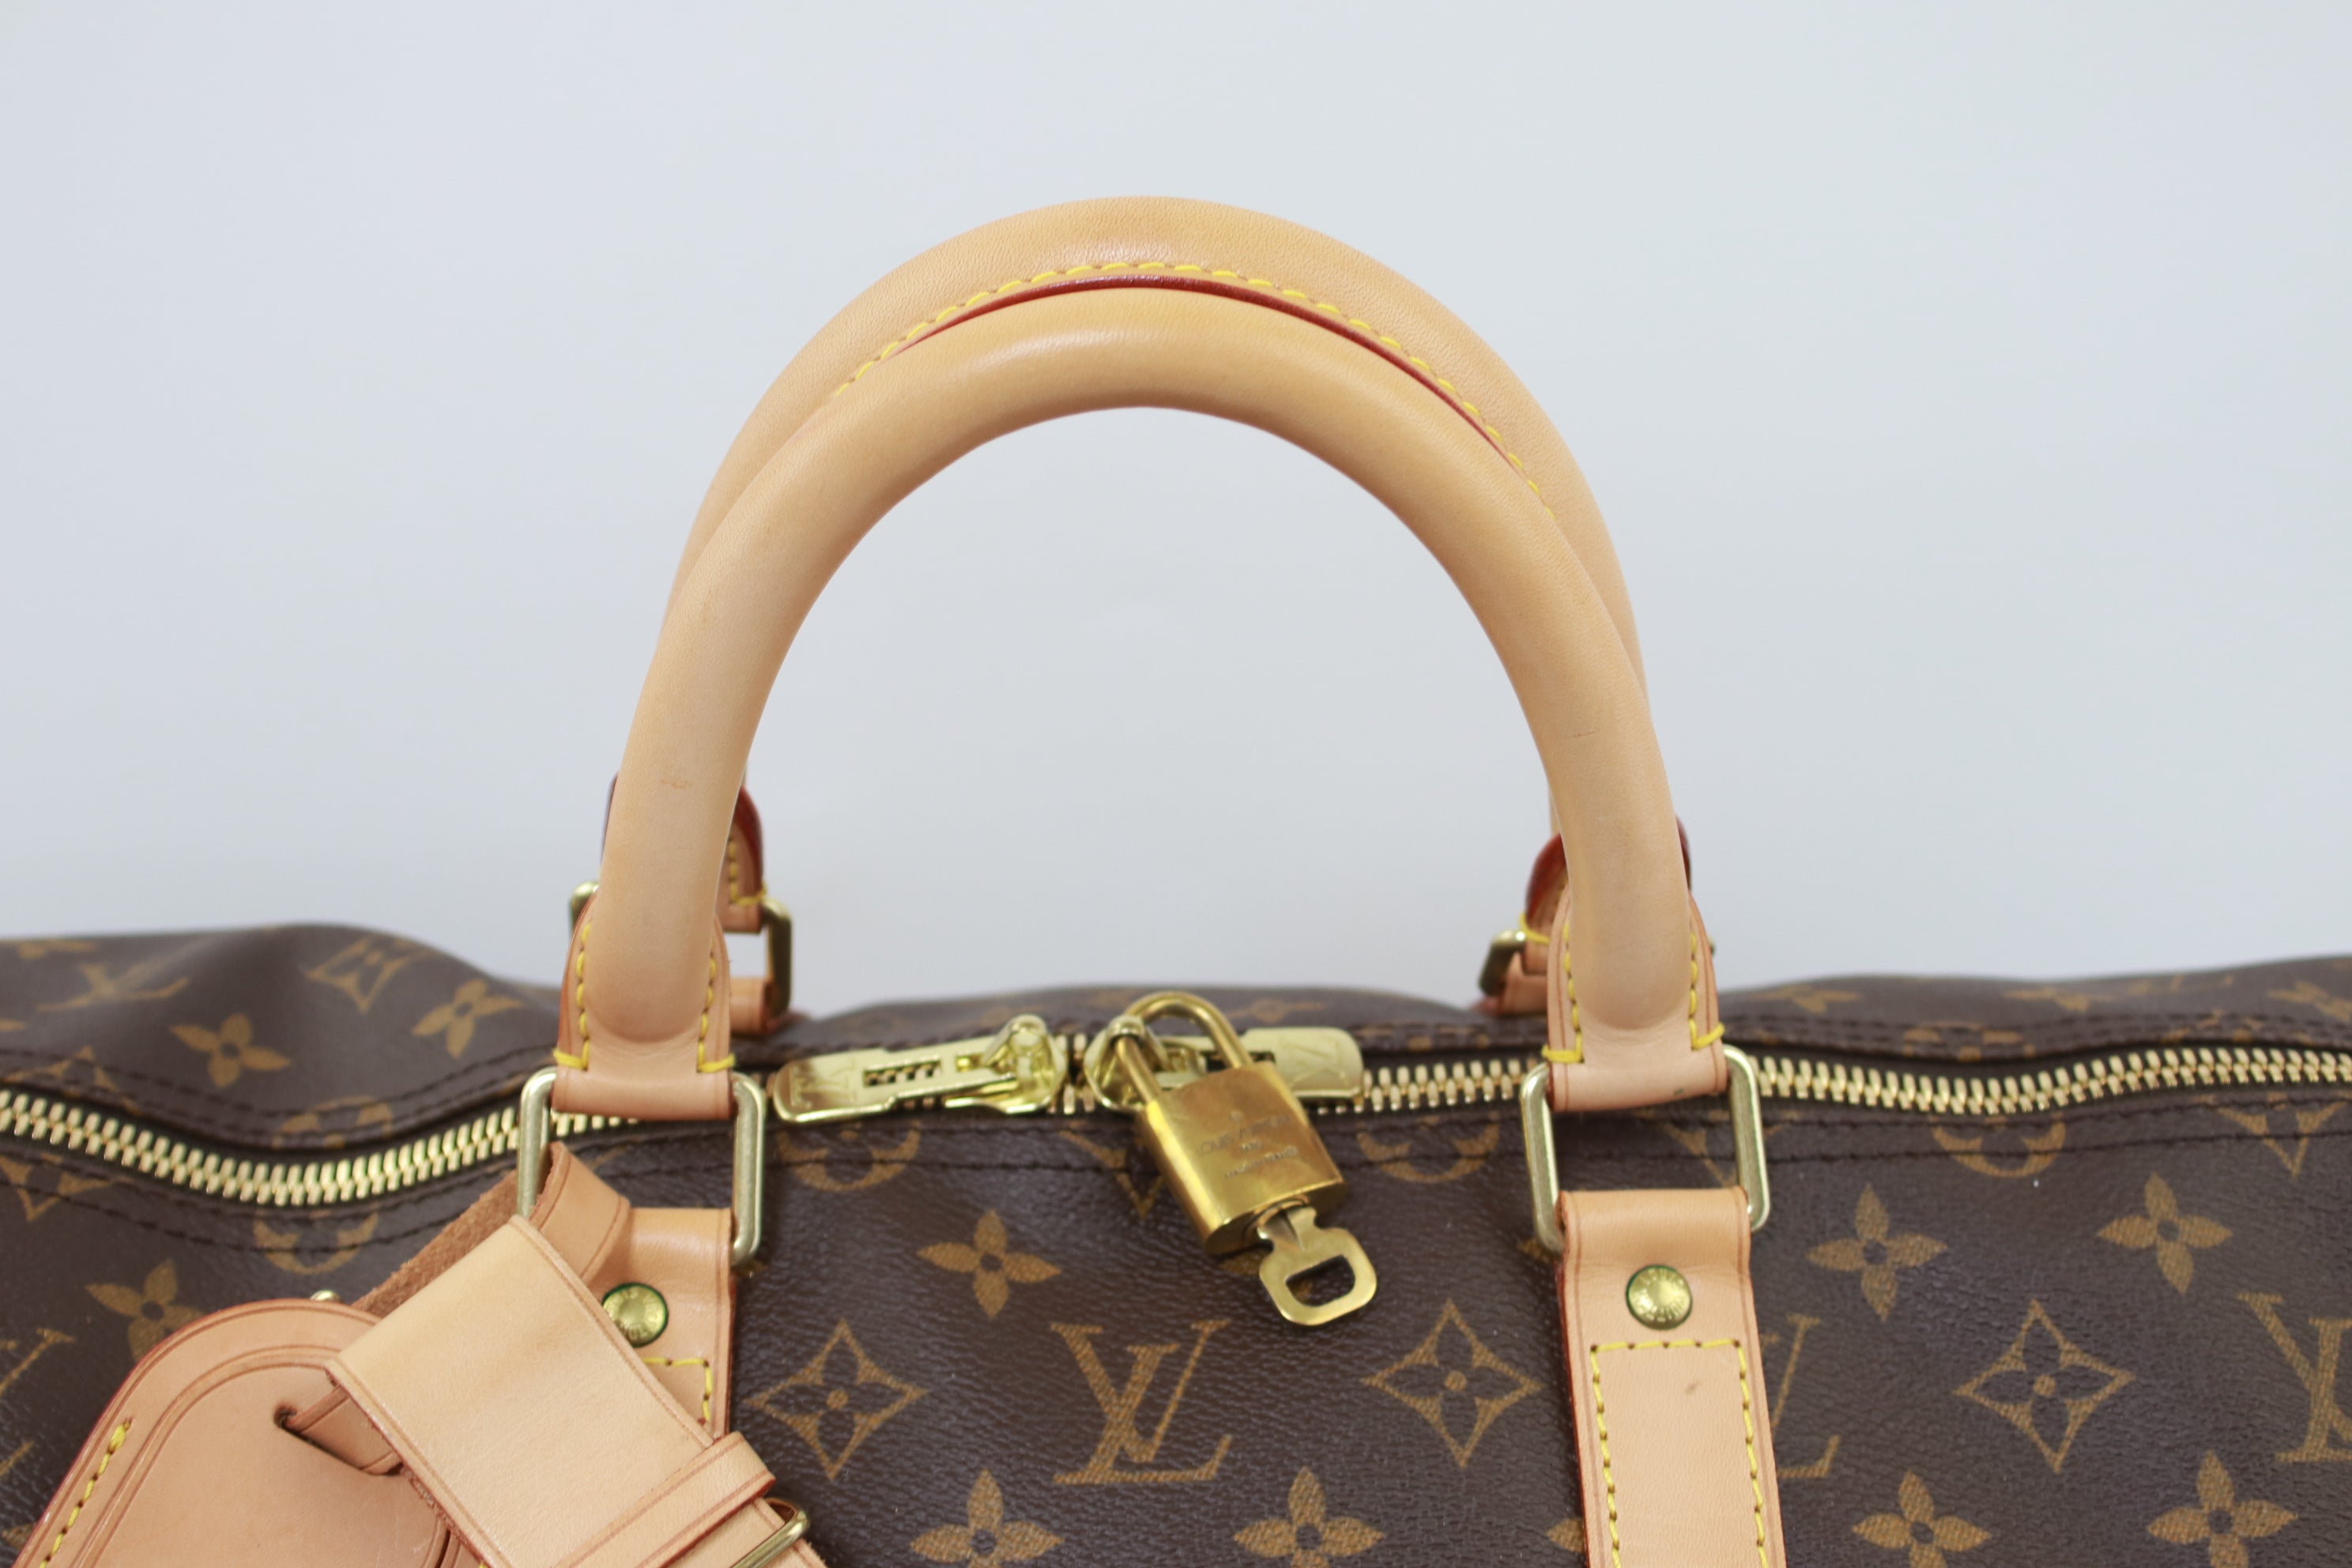 My vintage Louis Vuitton Keepall 45, over 30 years old and still